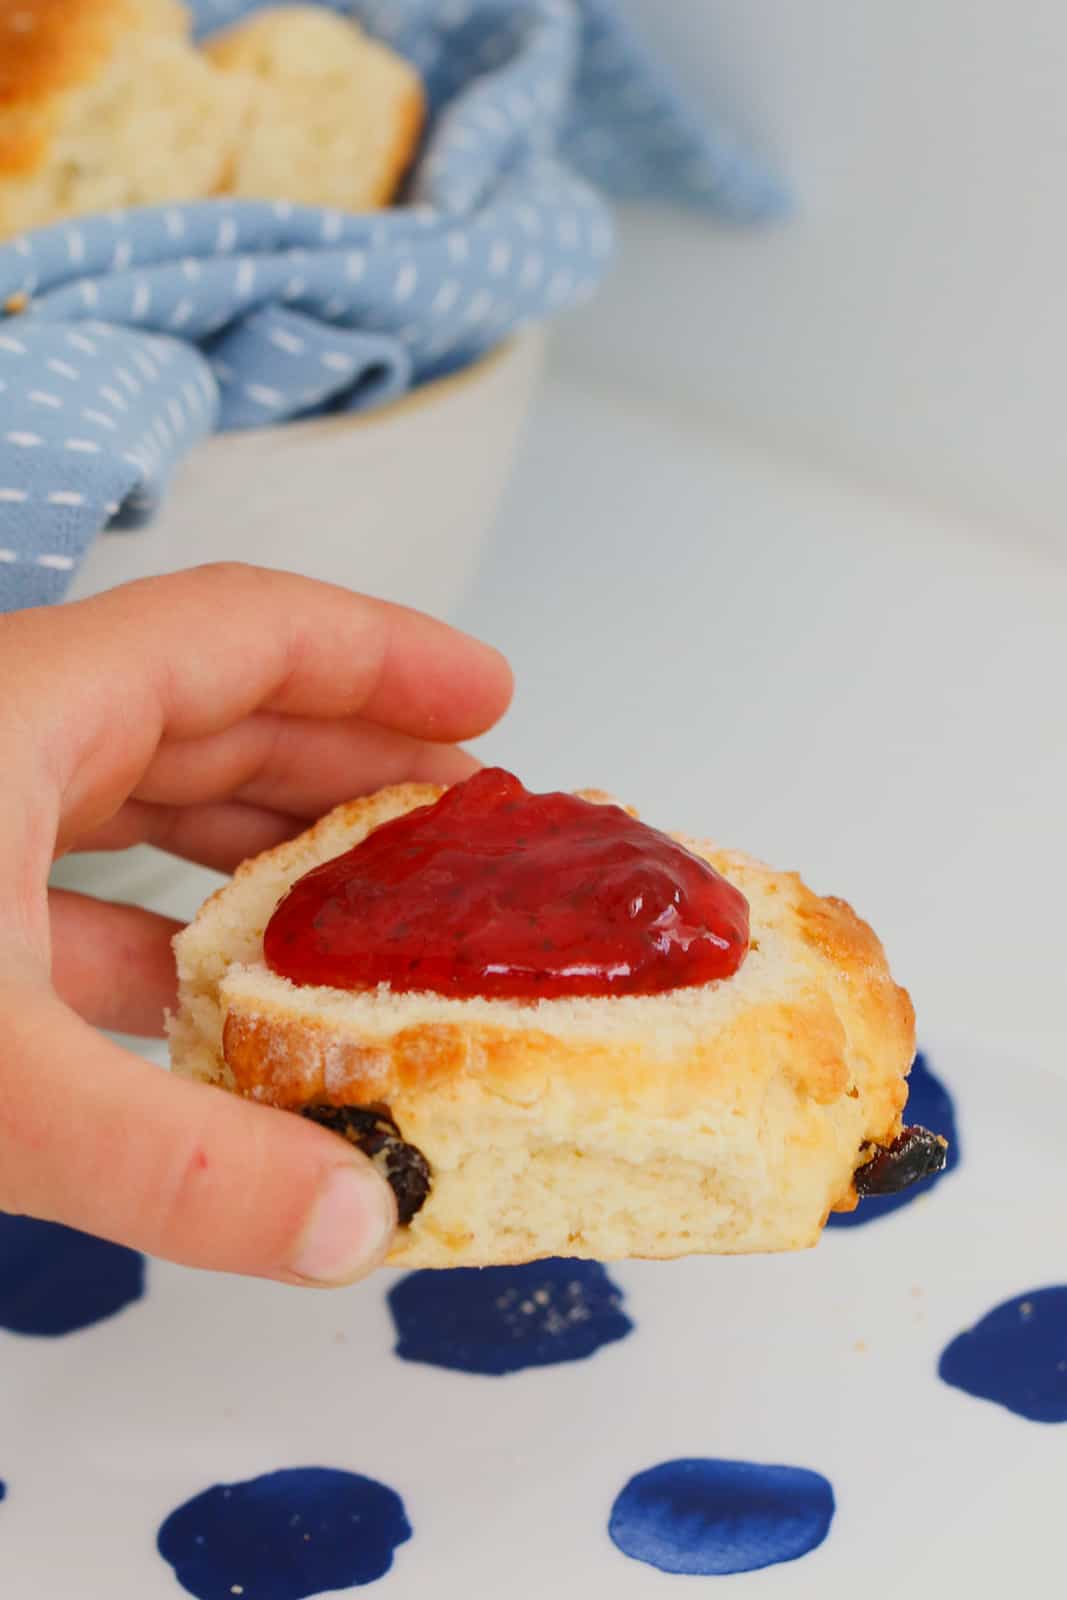 A close up shot of a hand holding a fruit scone with red jam on top